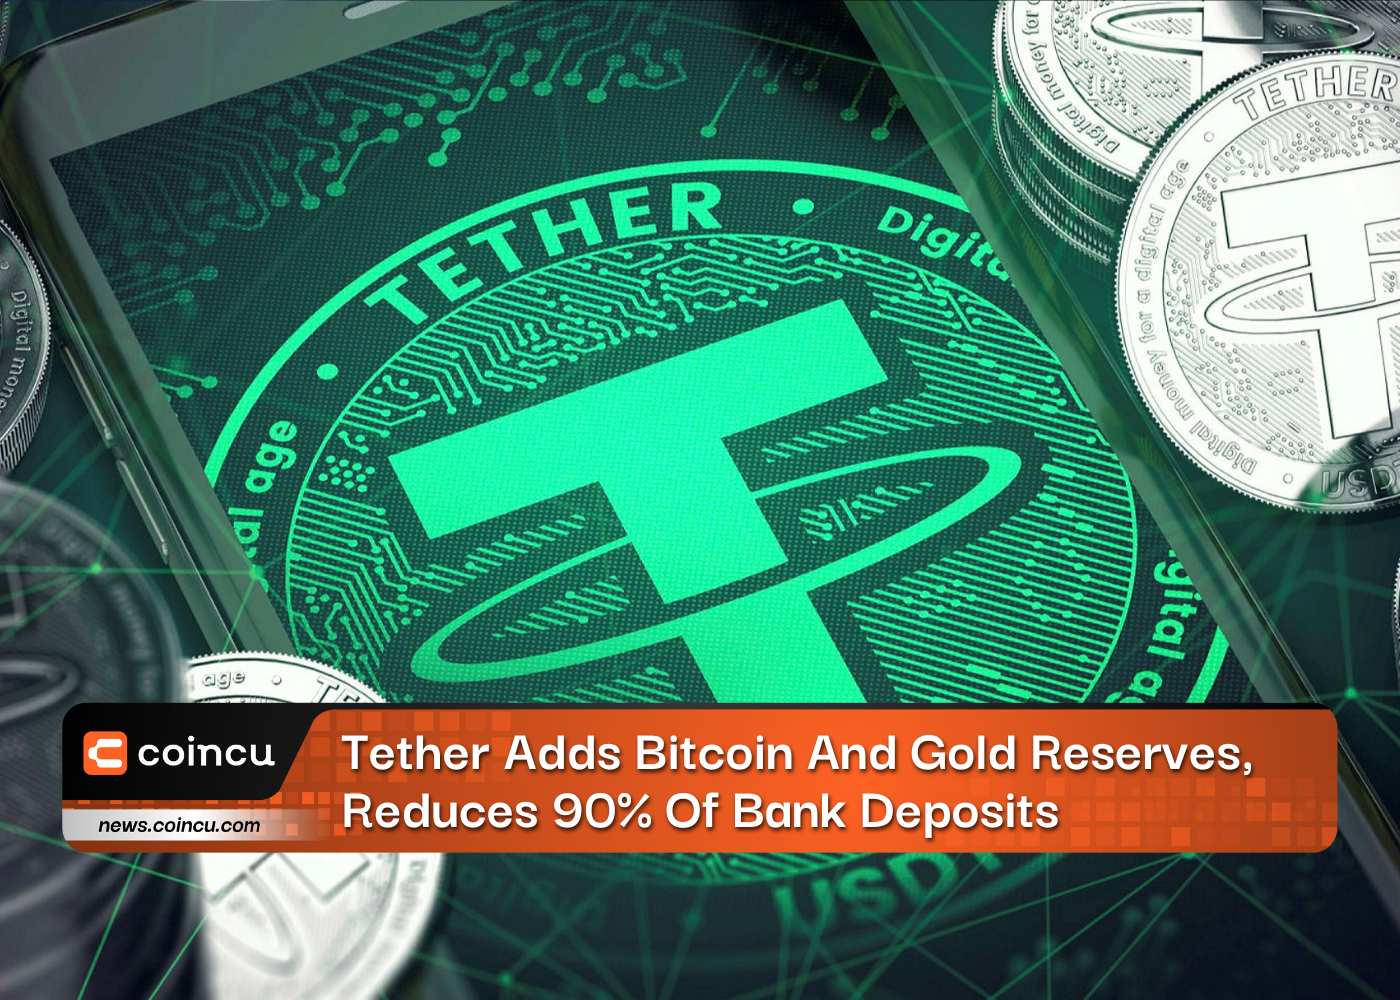 Tether Adds Bitcoin And Gold Reserves, Reduces 90% Of Bank Deposits